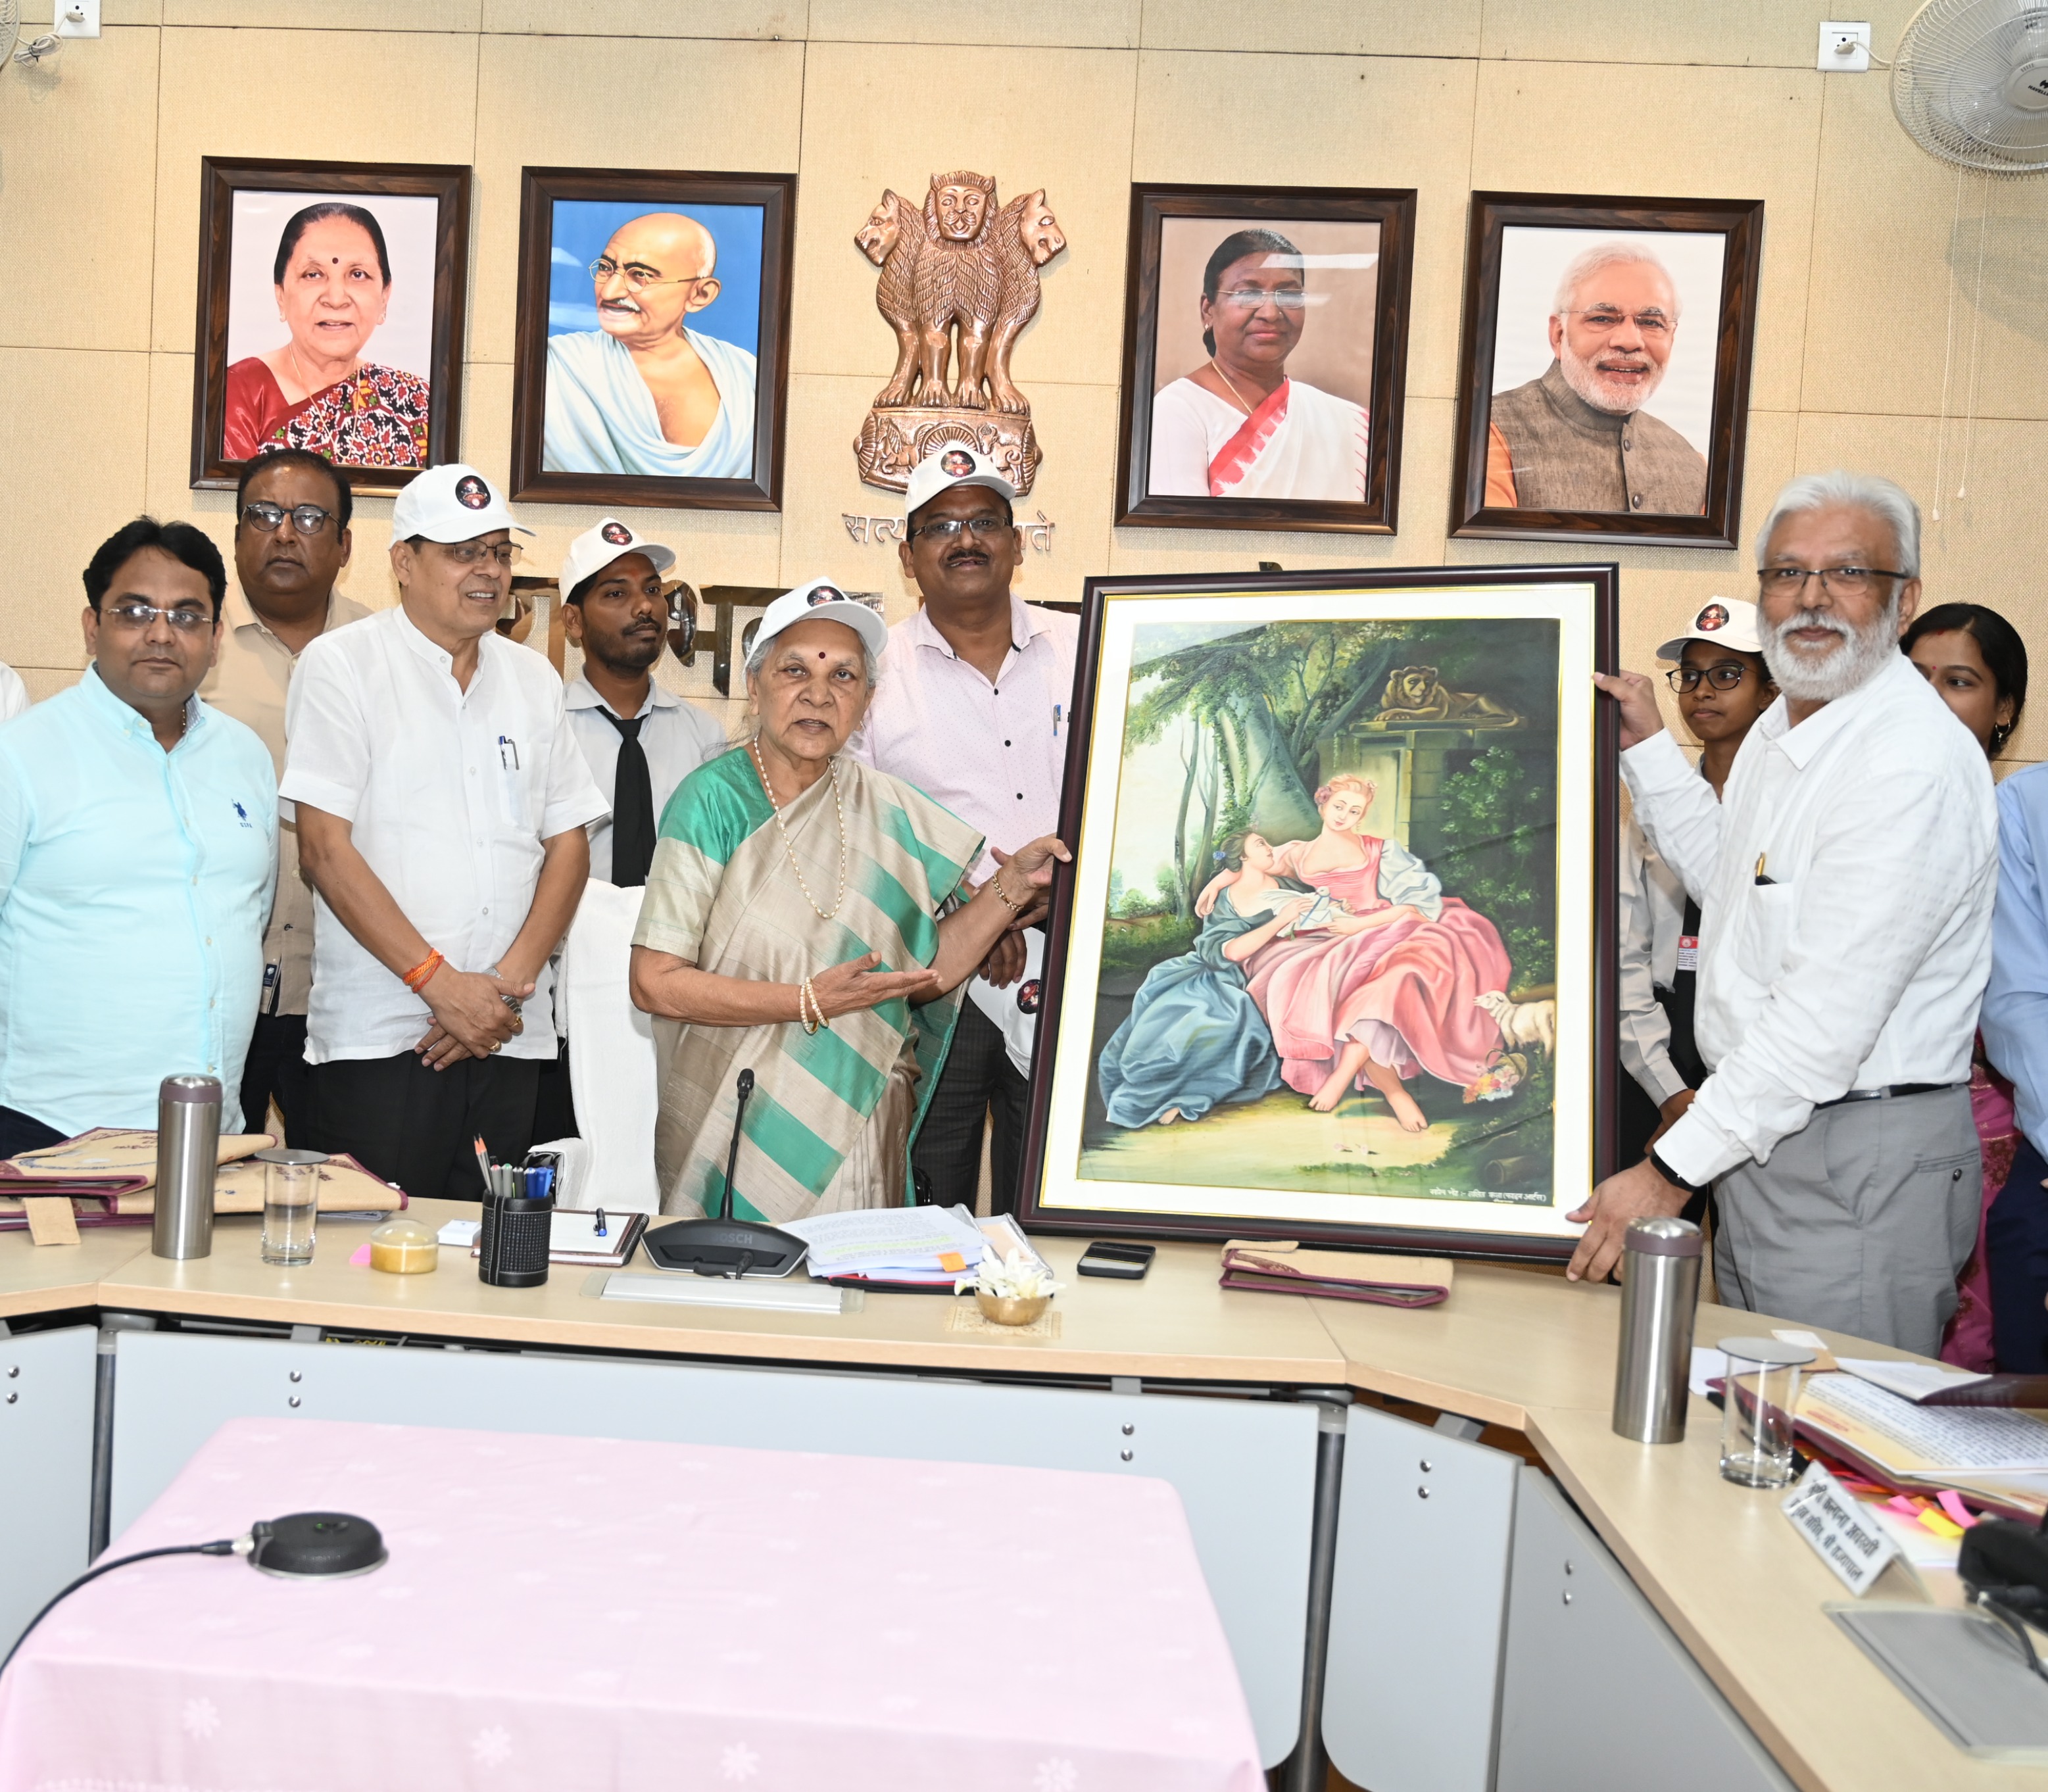 The Governor launched the "Mobile App" and "Emblem" for “Divya Deepotsav-2022” developed & created by Dr. Ram Manohar Lohia Avadh University, Ayodhya.